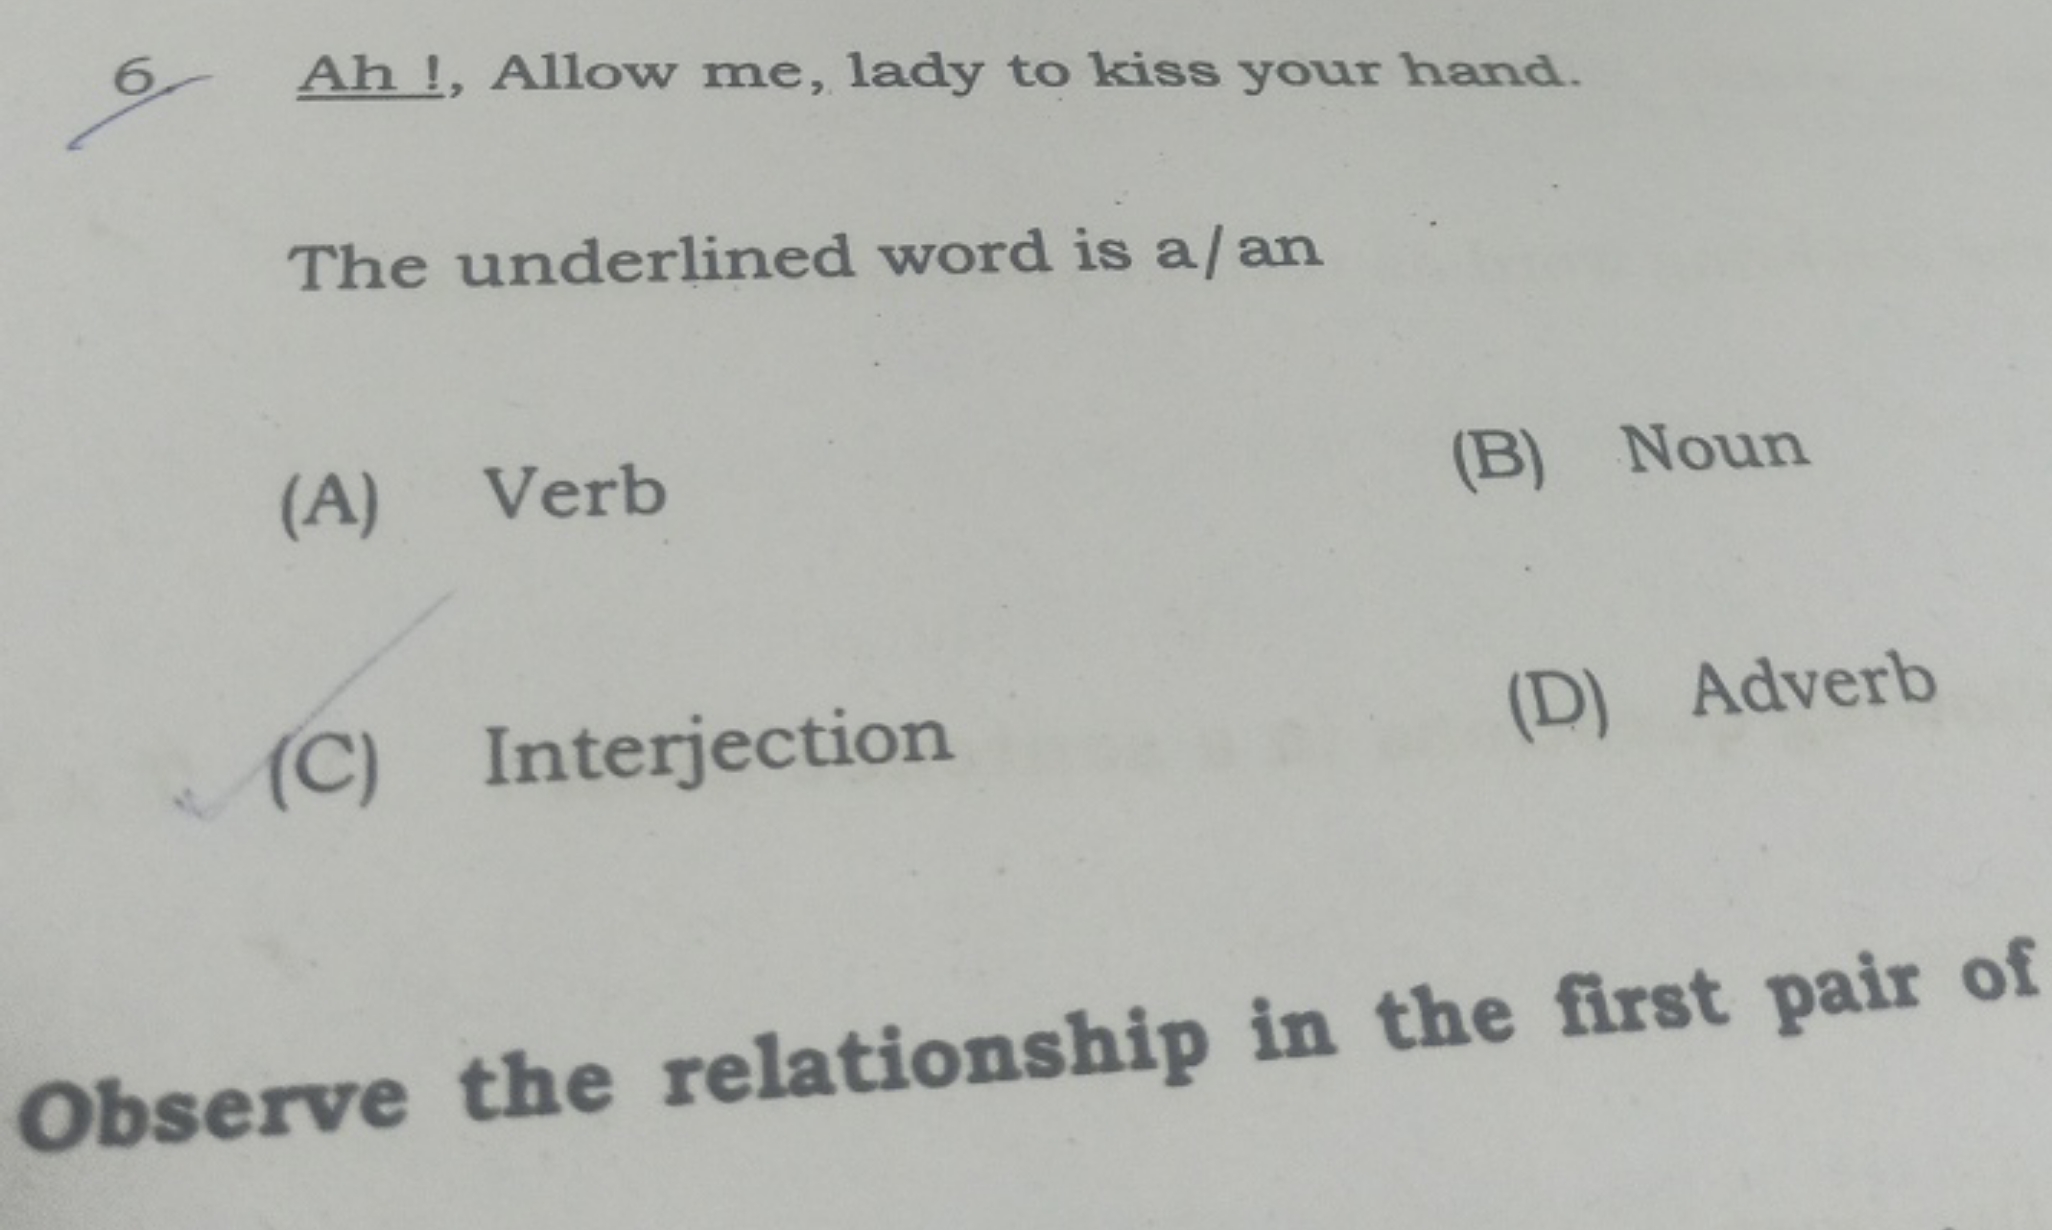 Ah !, Allow me, lady to kiss your hand. The underlined word is a/an